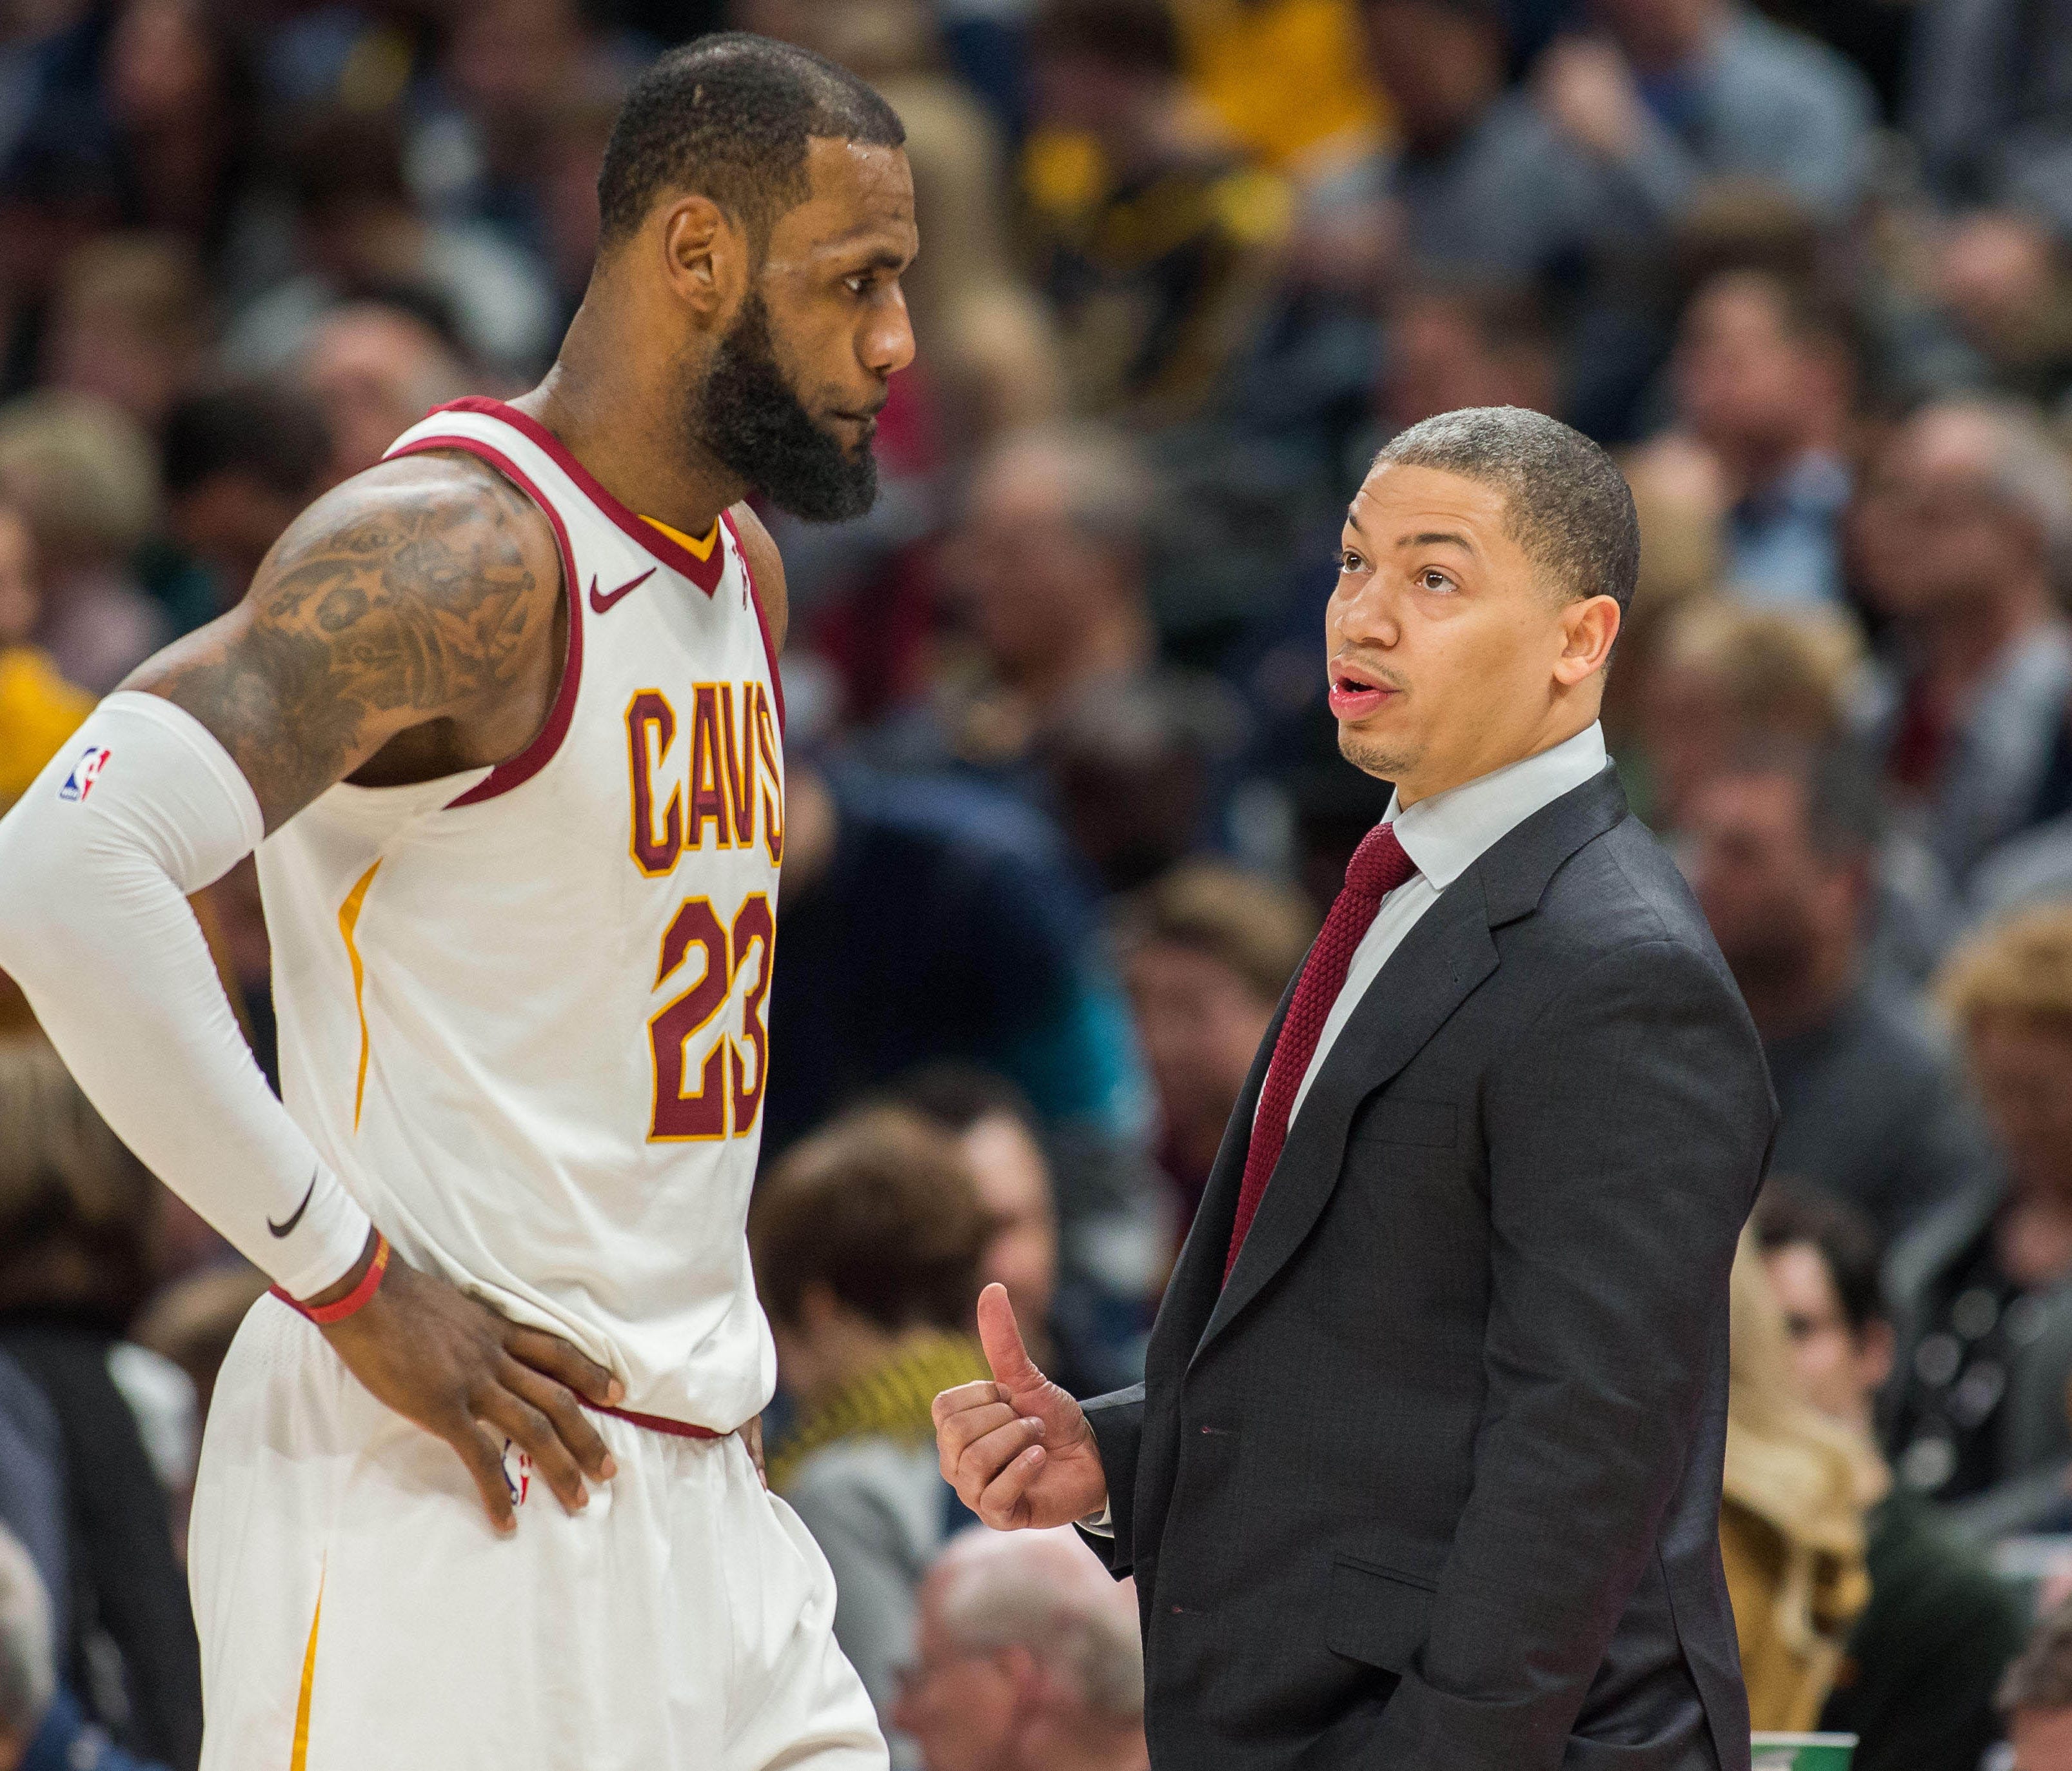 Cleveland Cavaliers forward LeBron James (23) and head coach Tyronn Lue talk during a time out in the second half against the Indiana Pacers at Bankers Life Fieldhouse.